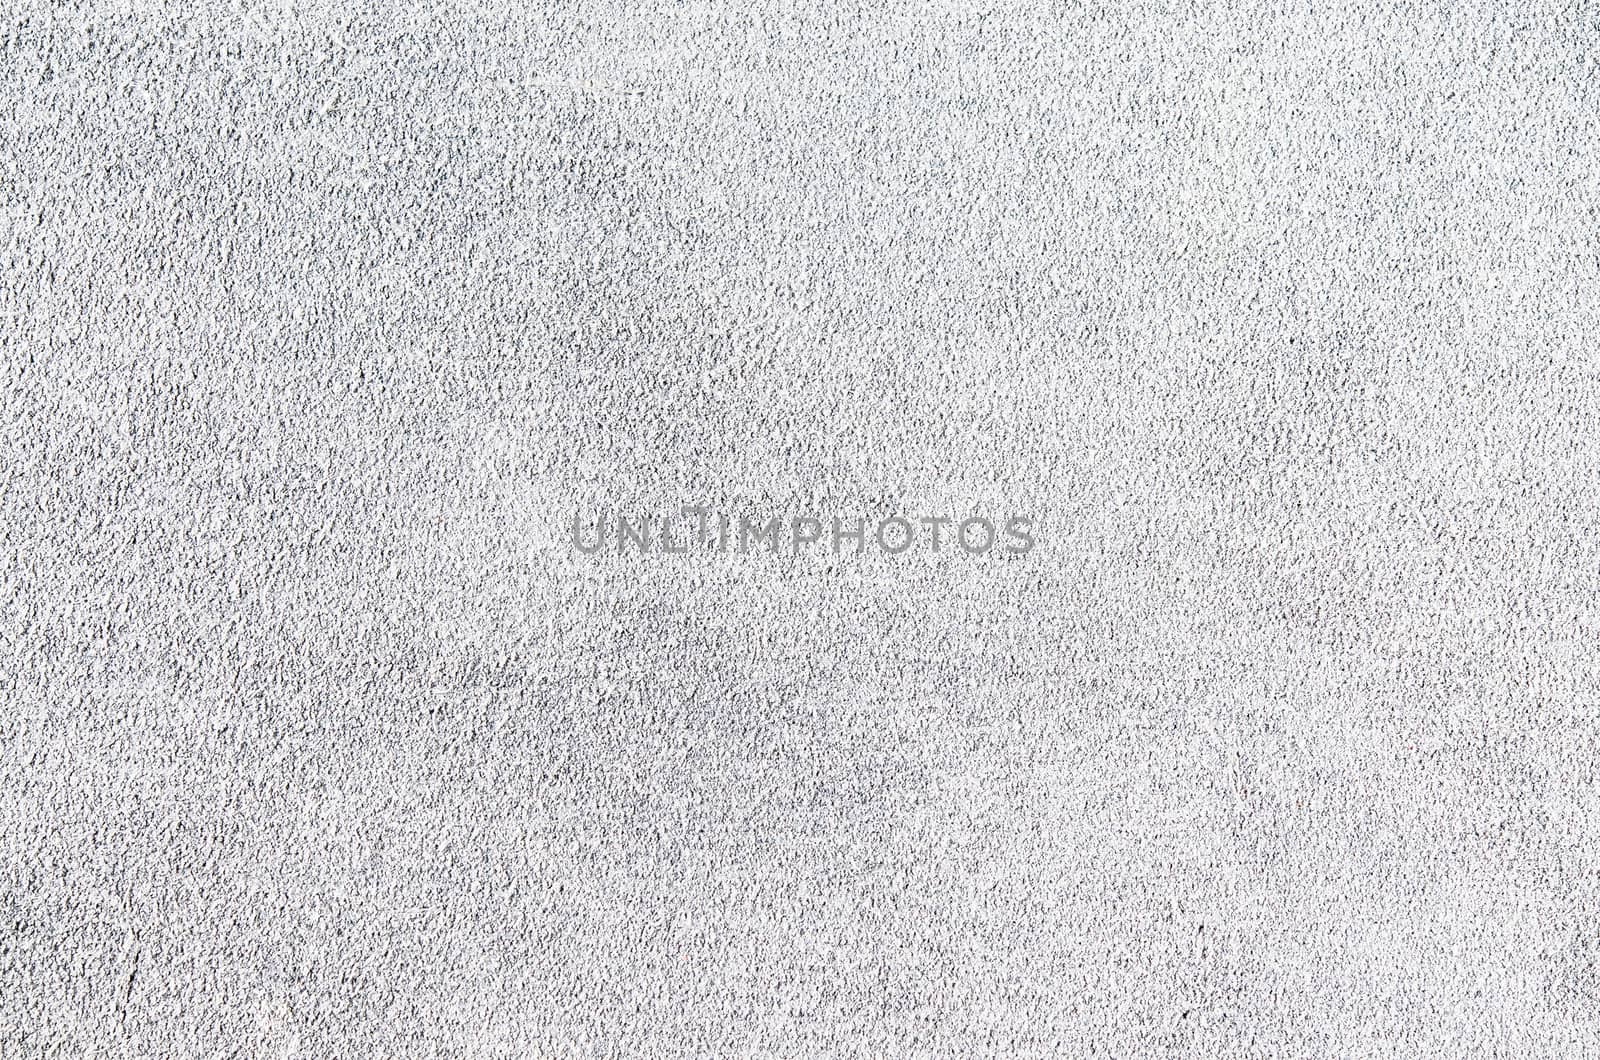 Light grey suede soft leather as texture background. Close up shammy leather texture